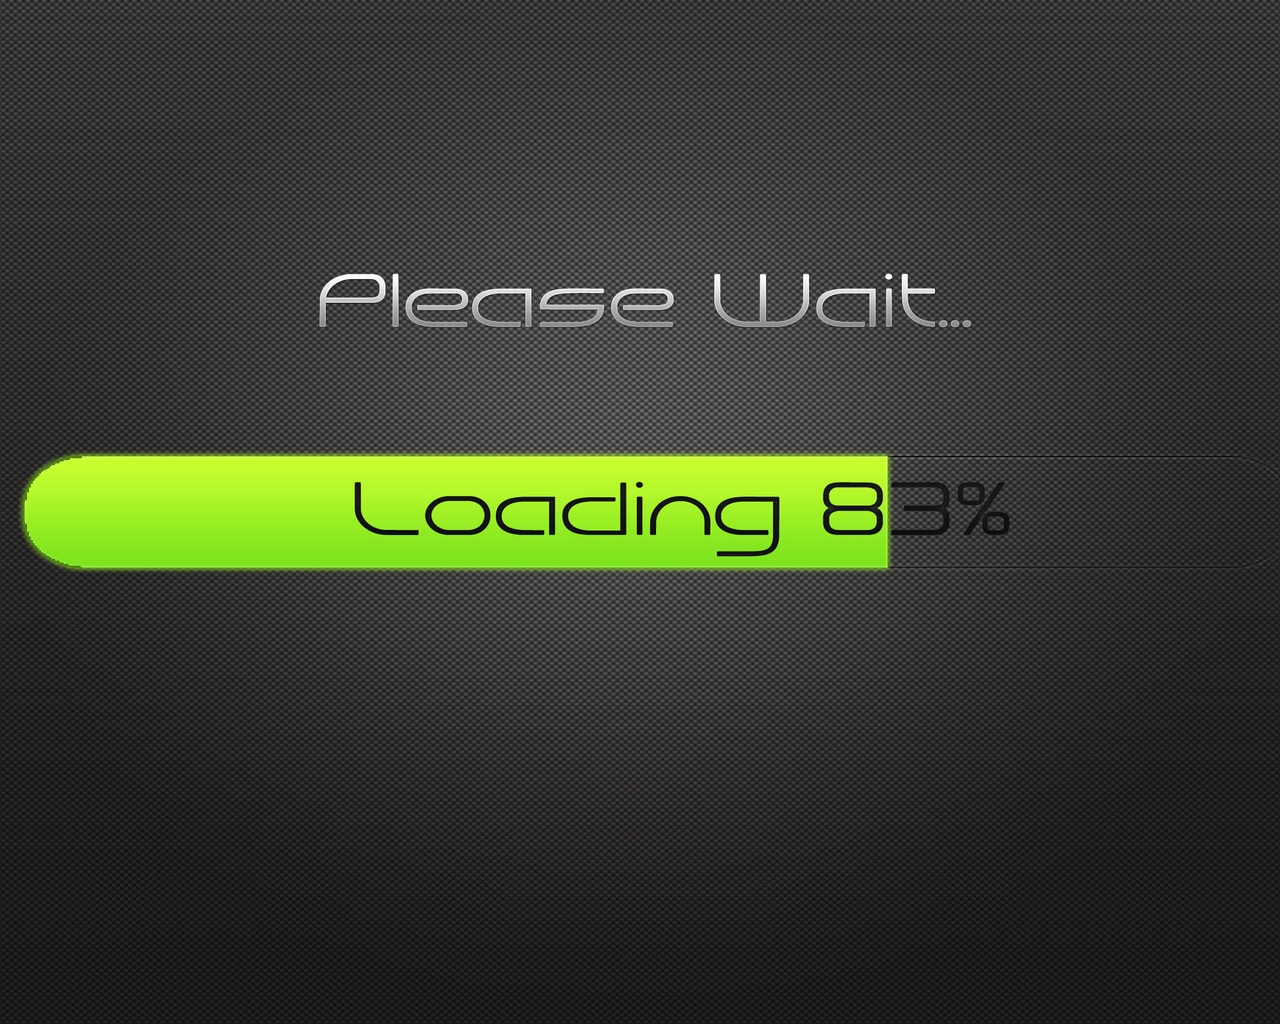 Loading for 1280 x 1024 resolution